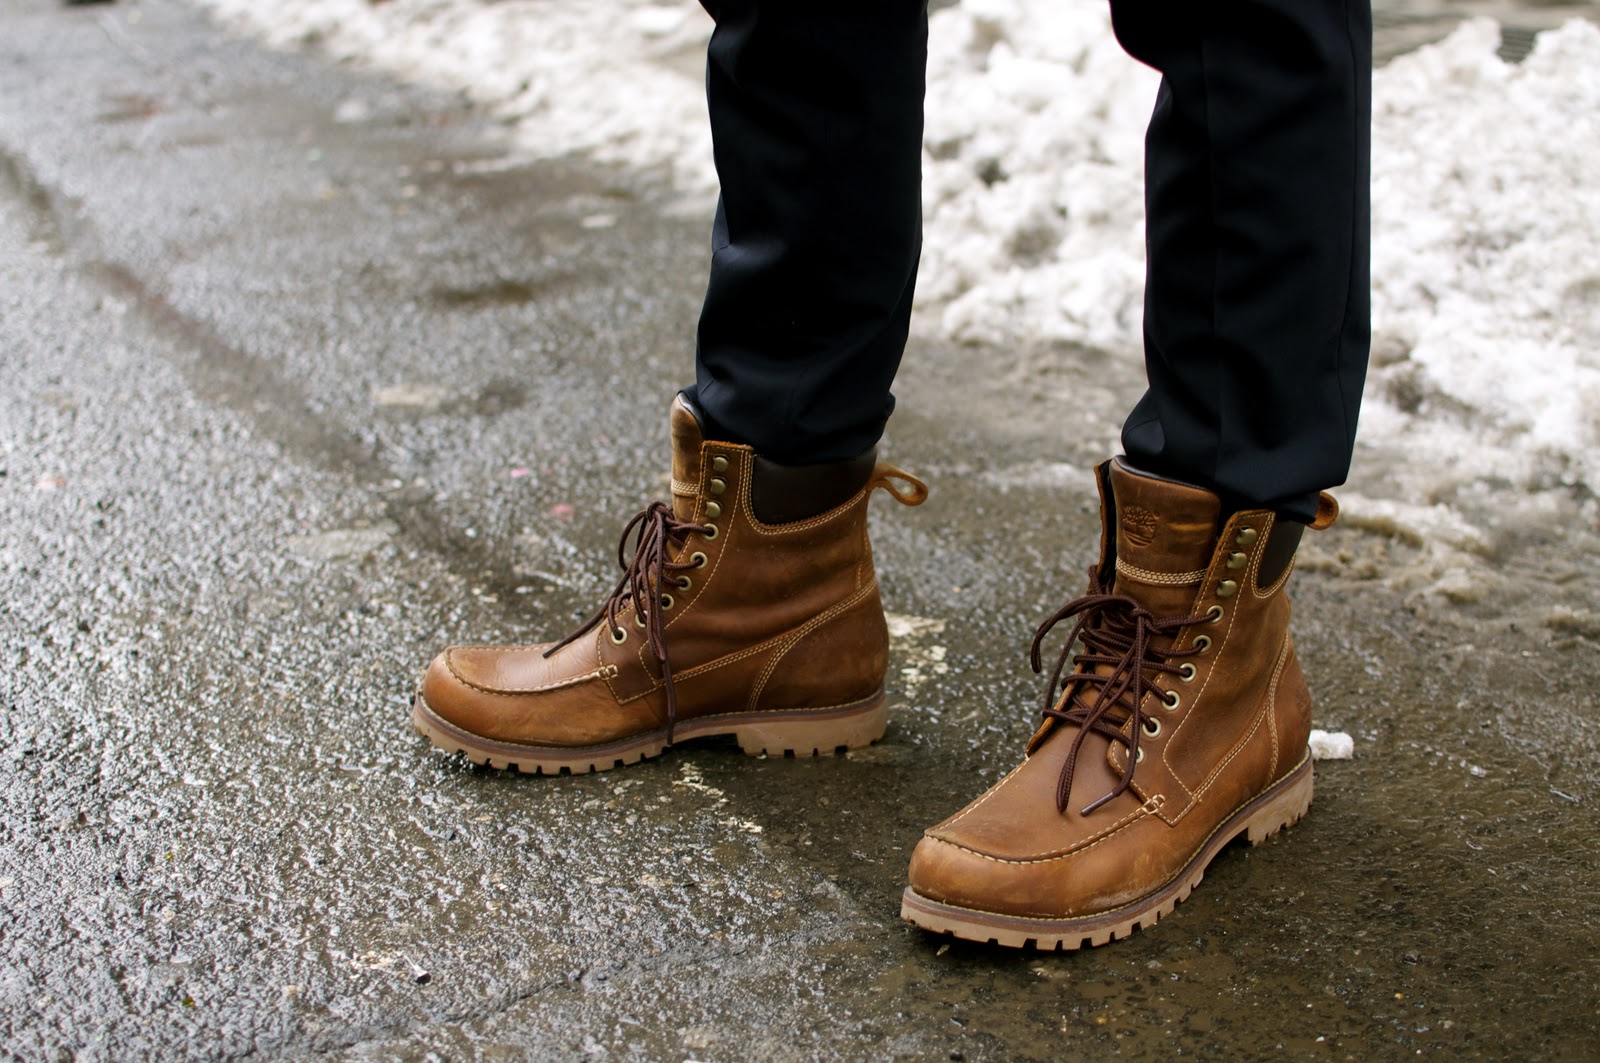 Fashion Ideas on How to Wear Work Boots 